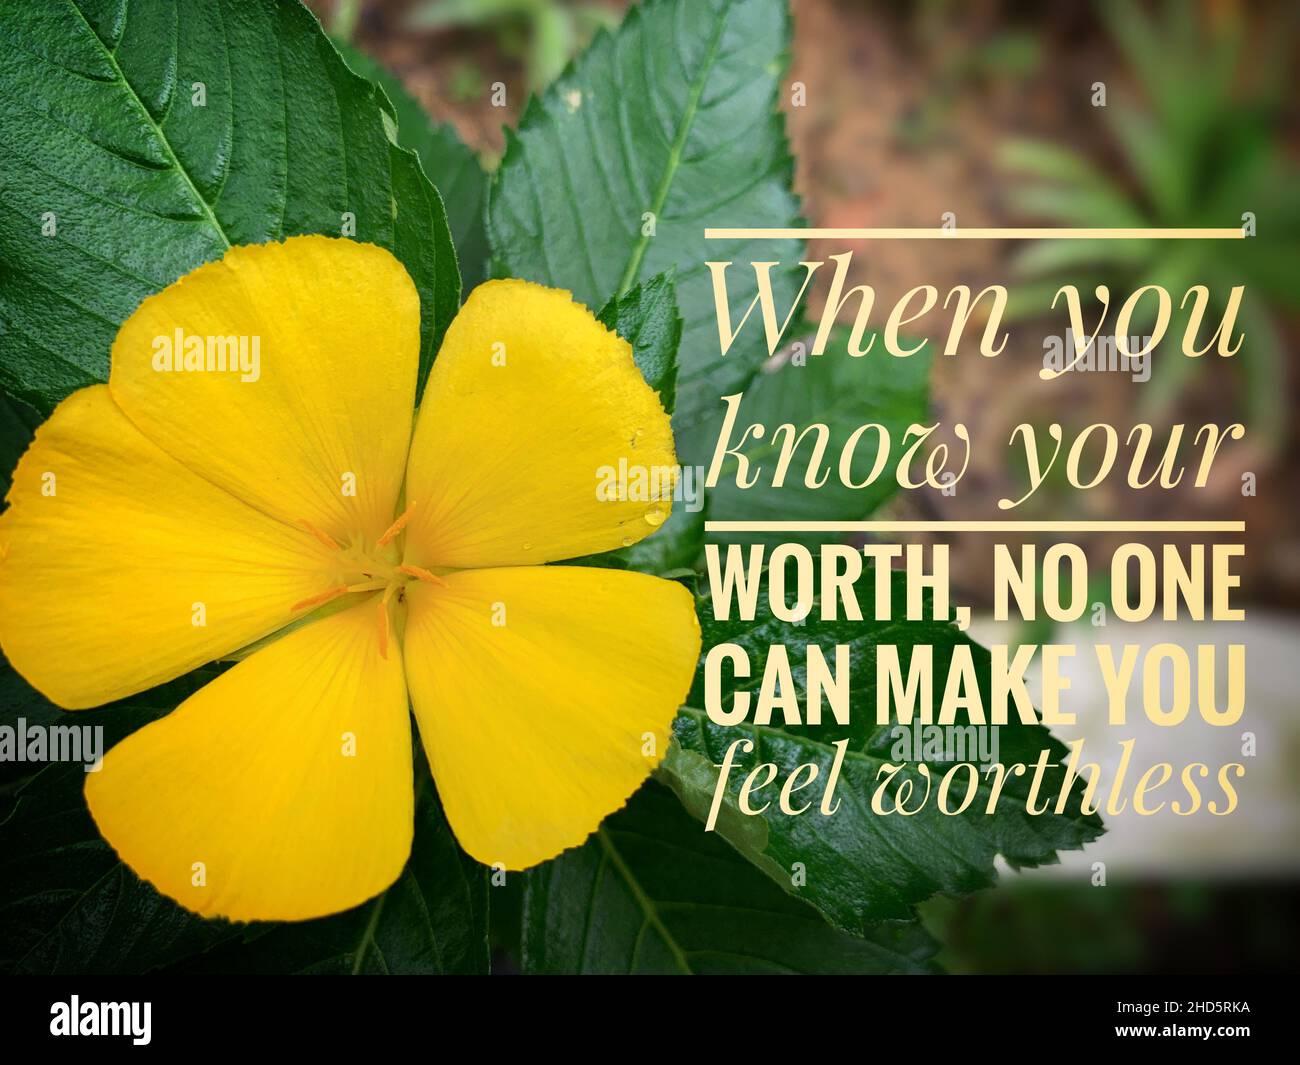 Inspirational motivational quote - When you know your worth, no one can make you feel worthless. With beautiful yellow flower background. Stock Photo